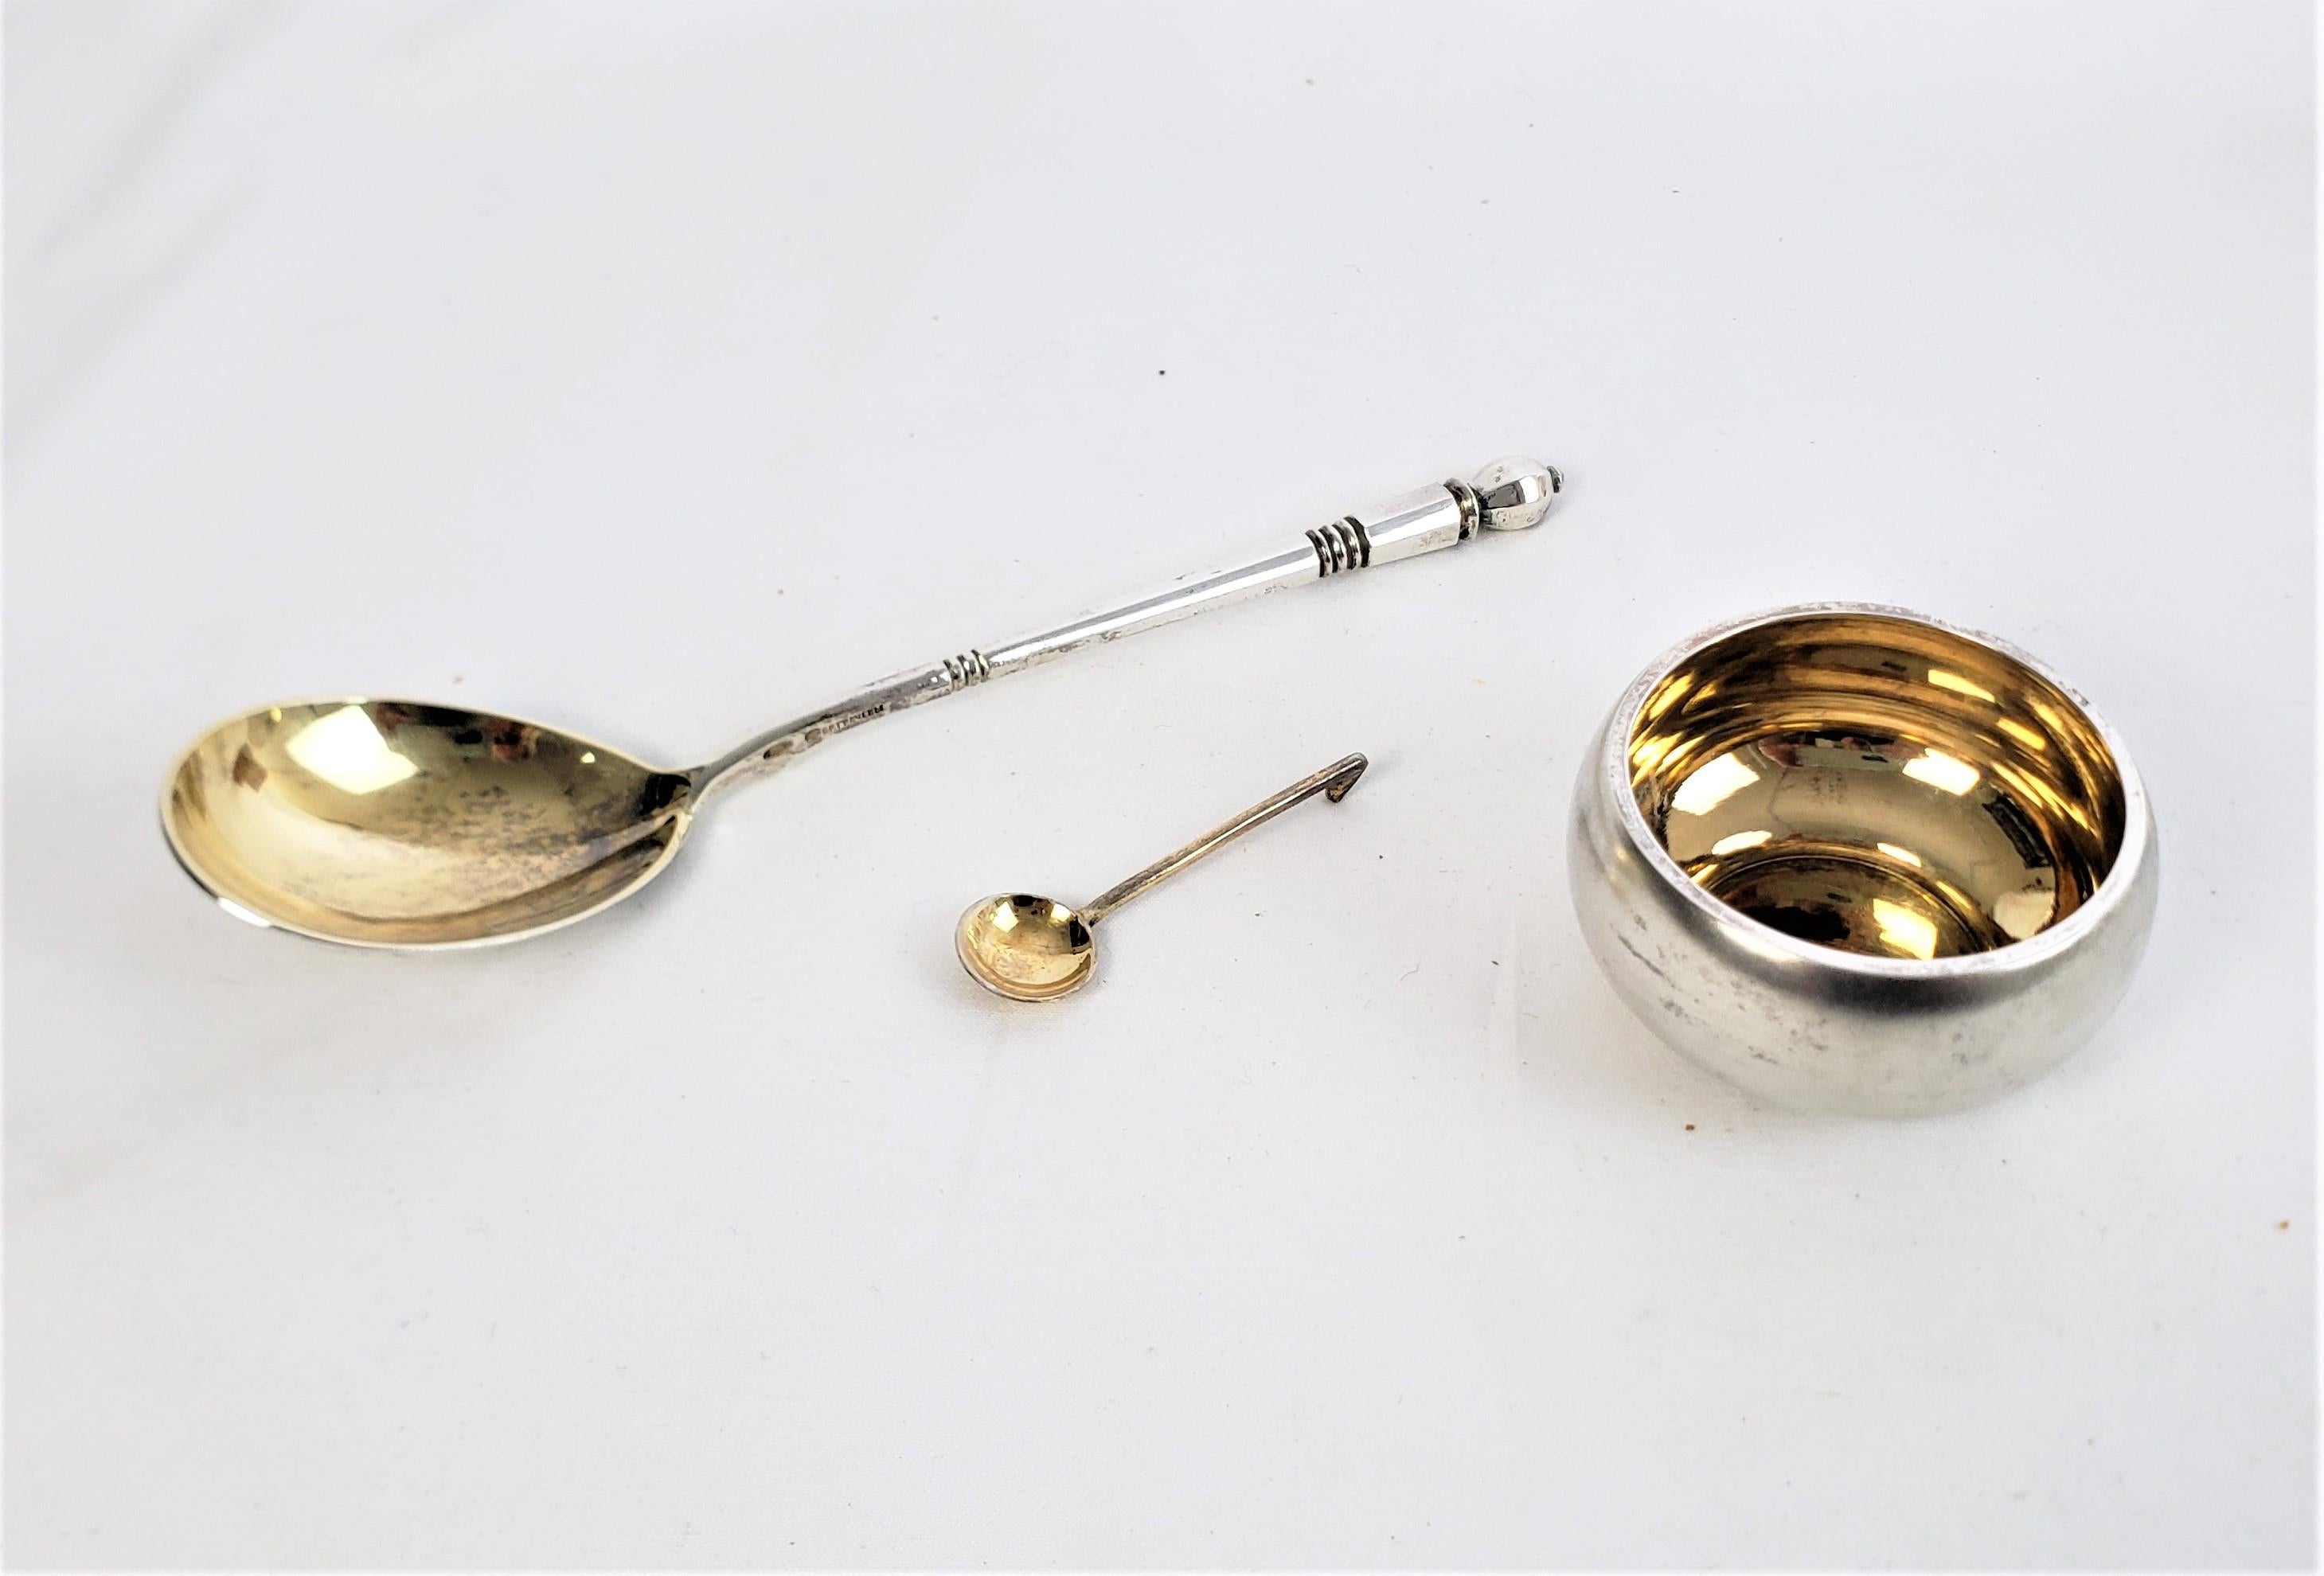 Hand-Crafted Antique Russian Tsarist .888 Silver Serving Spoon & Open Salt Cellar & Spoon Set For Sale